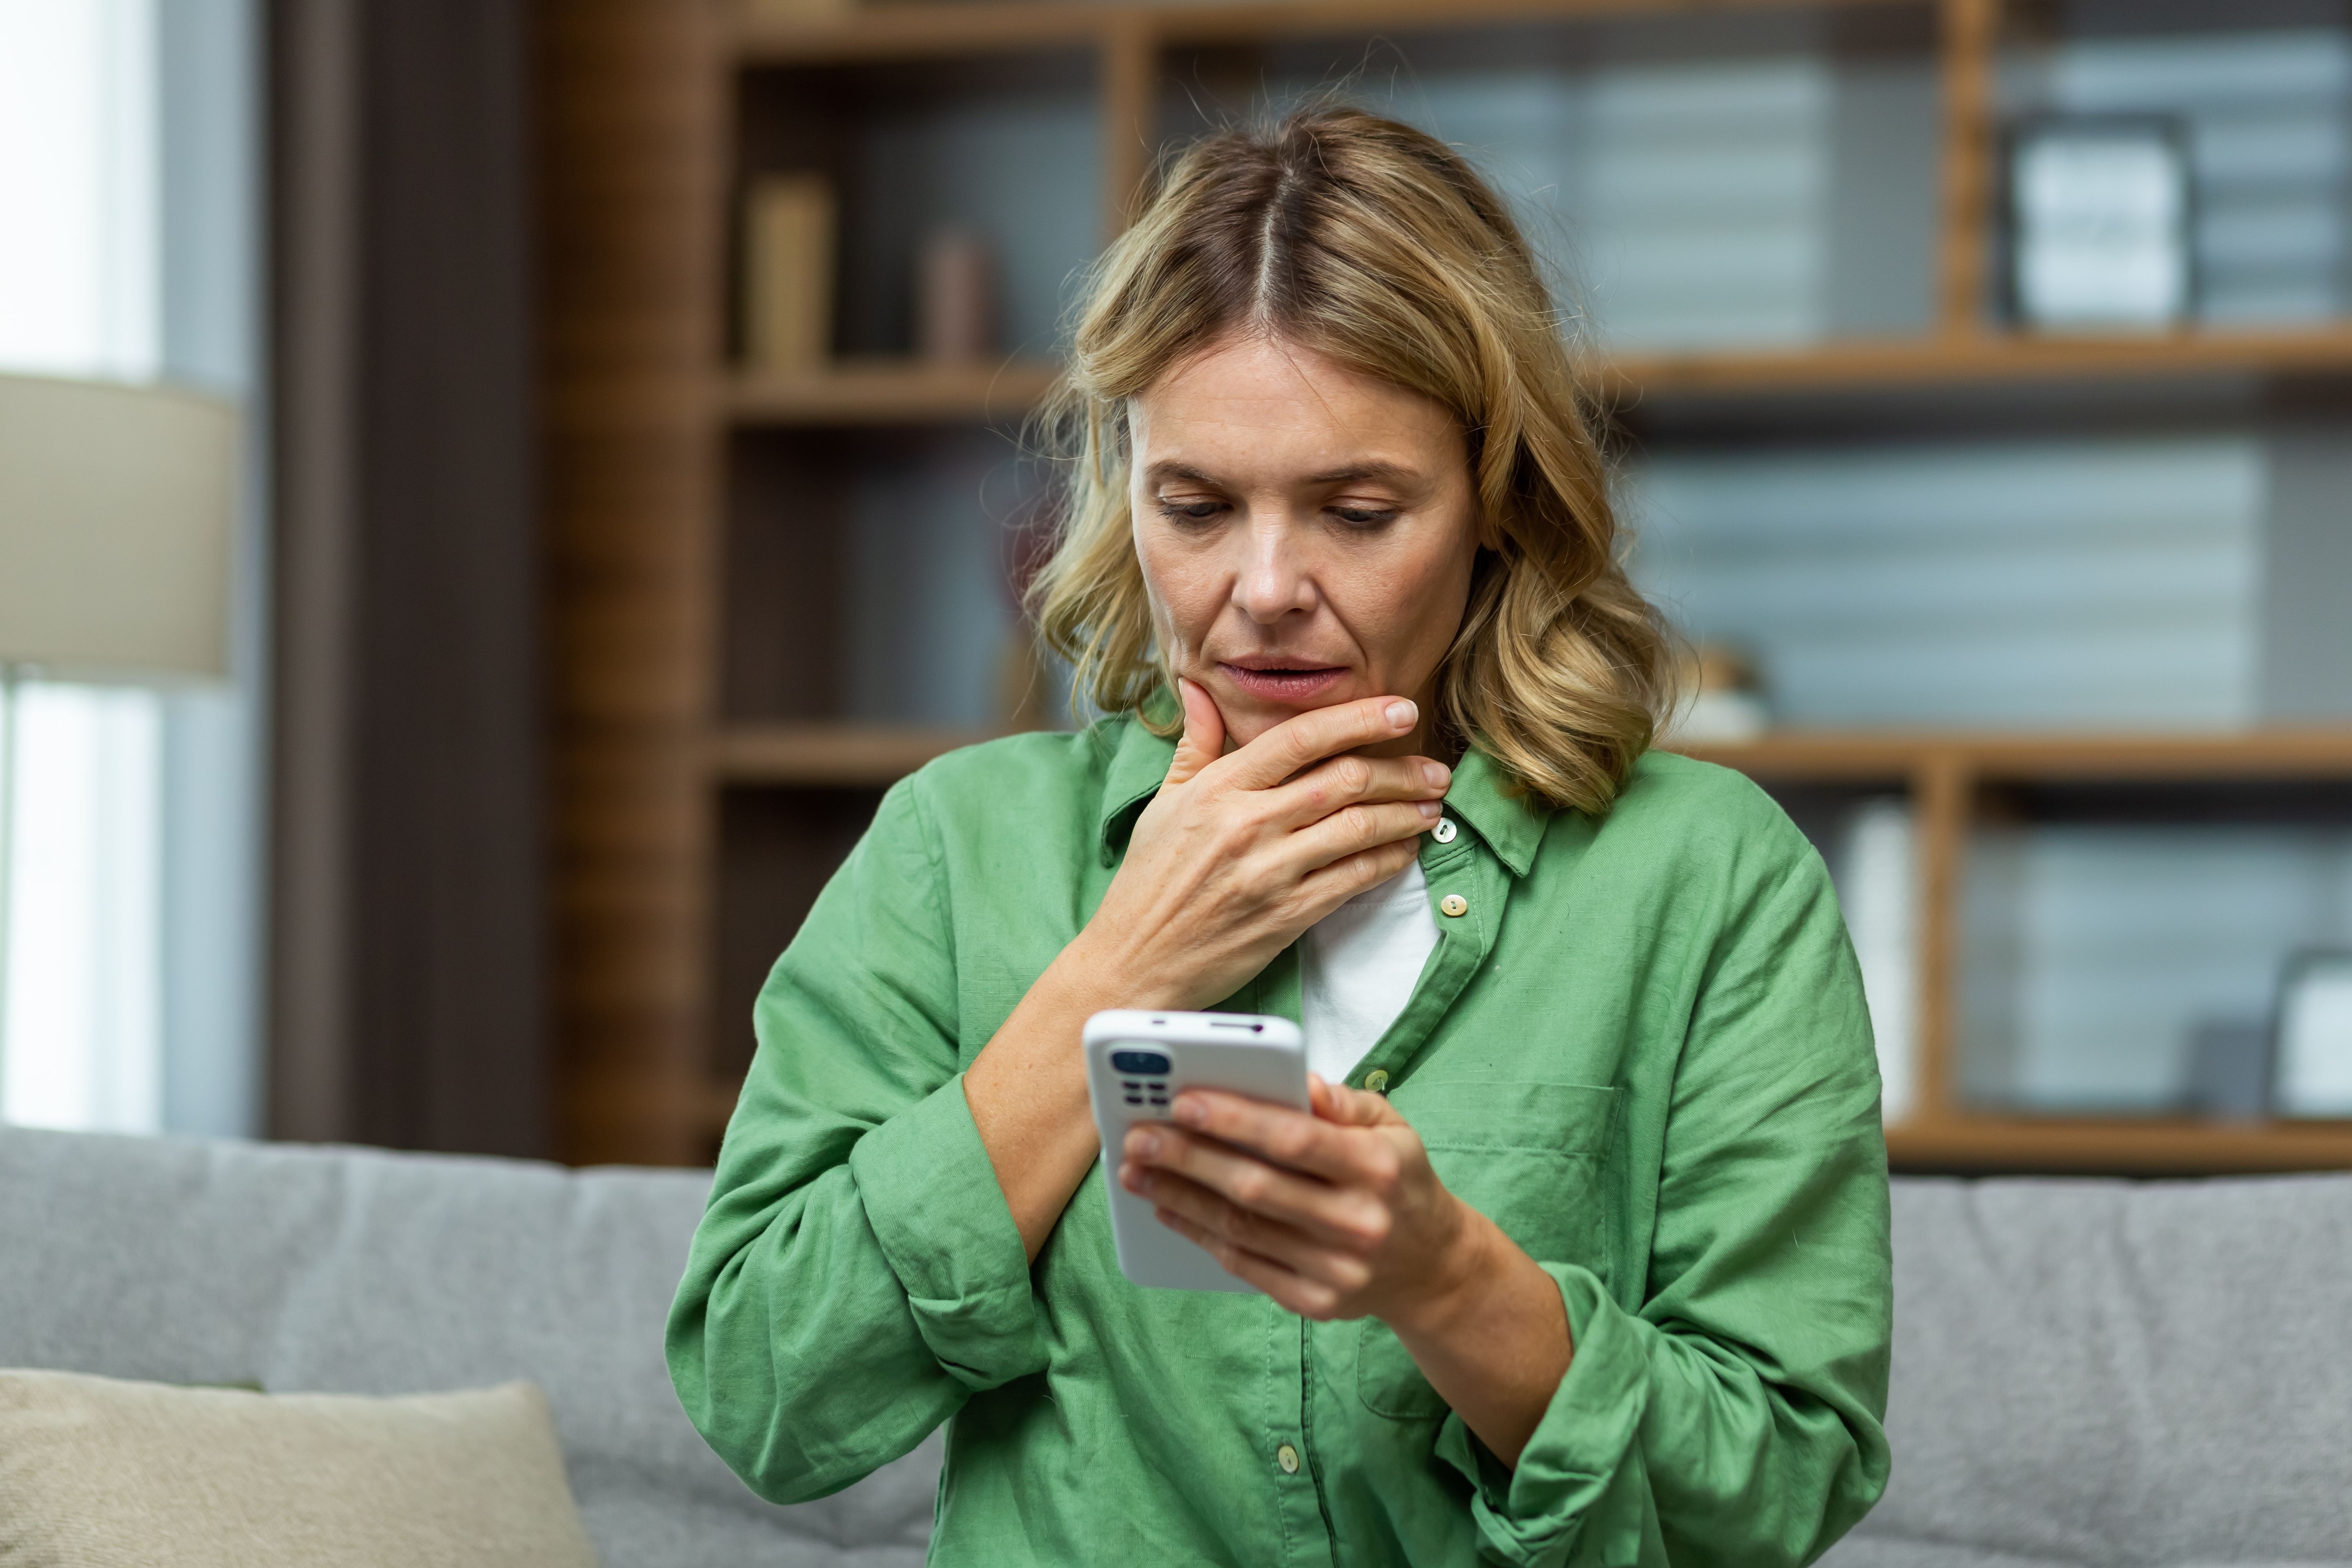 A worried senior woman holding her phone | Source: Shutterstock